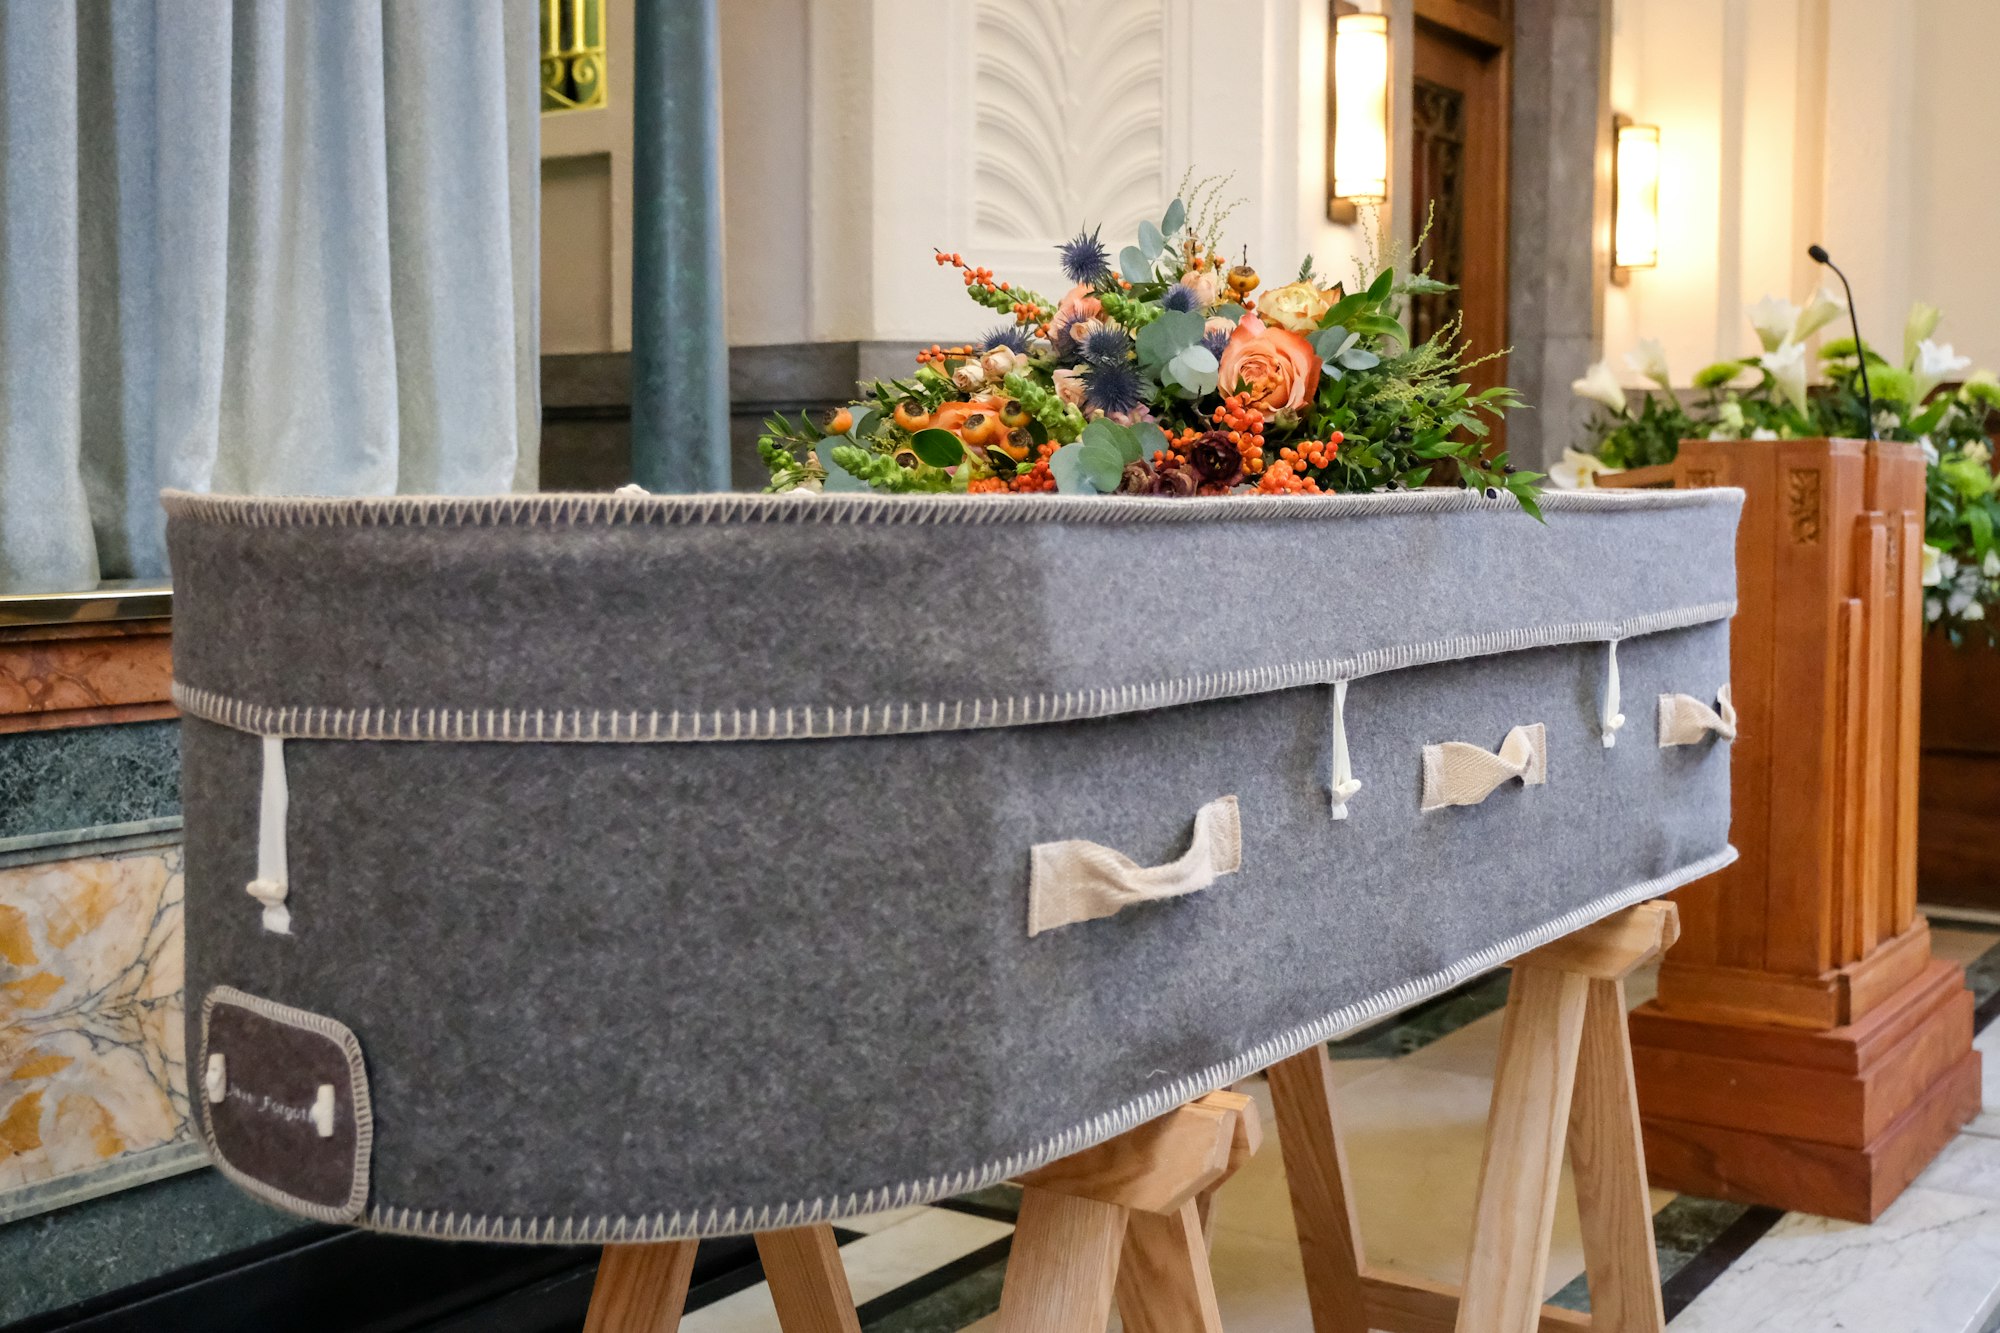 How to Choose a Coffin Supplier